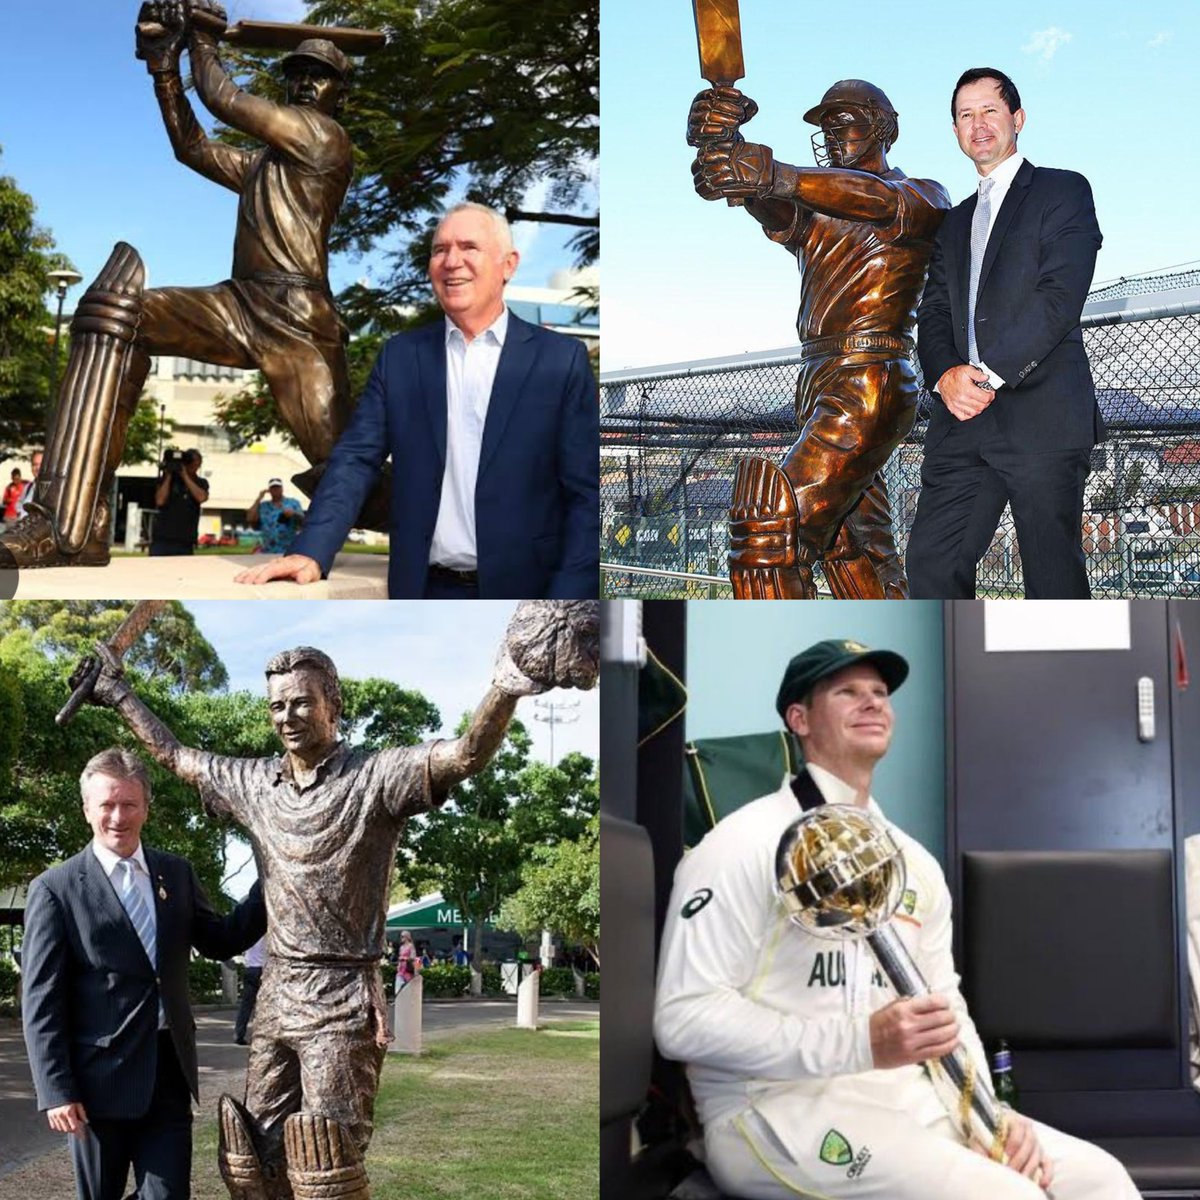 Only 3 Aussie batters have been immortalised with bronze statues for getting over 10000 runs in test cricket and averaging over 50 with exception of Sir Donald Bradman who scored 6996 @99.94. Steve Smith would join this prestigious group once he gets there.